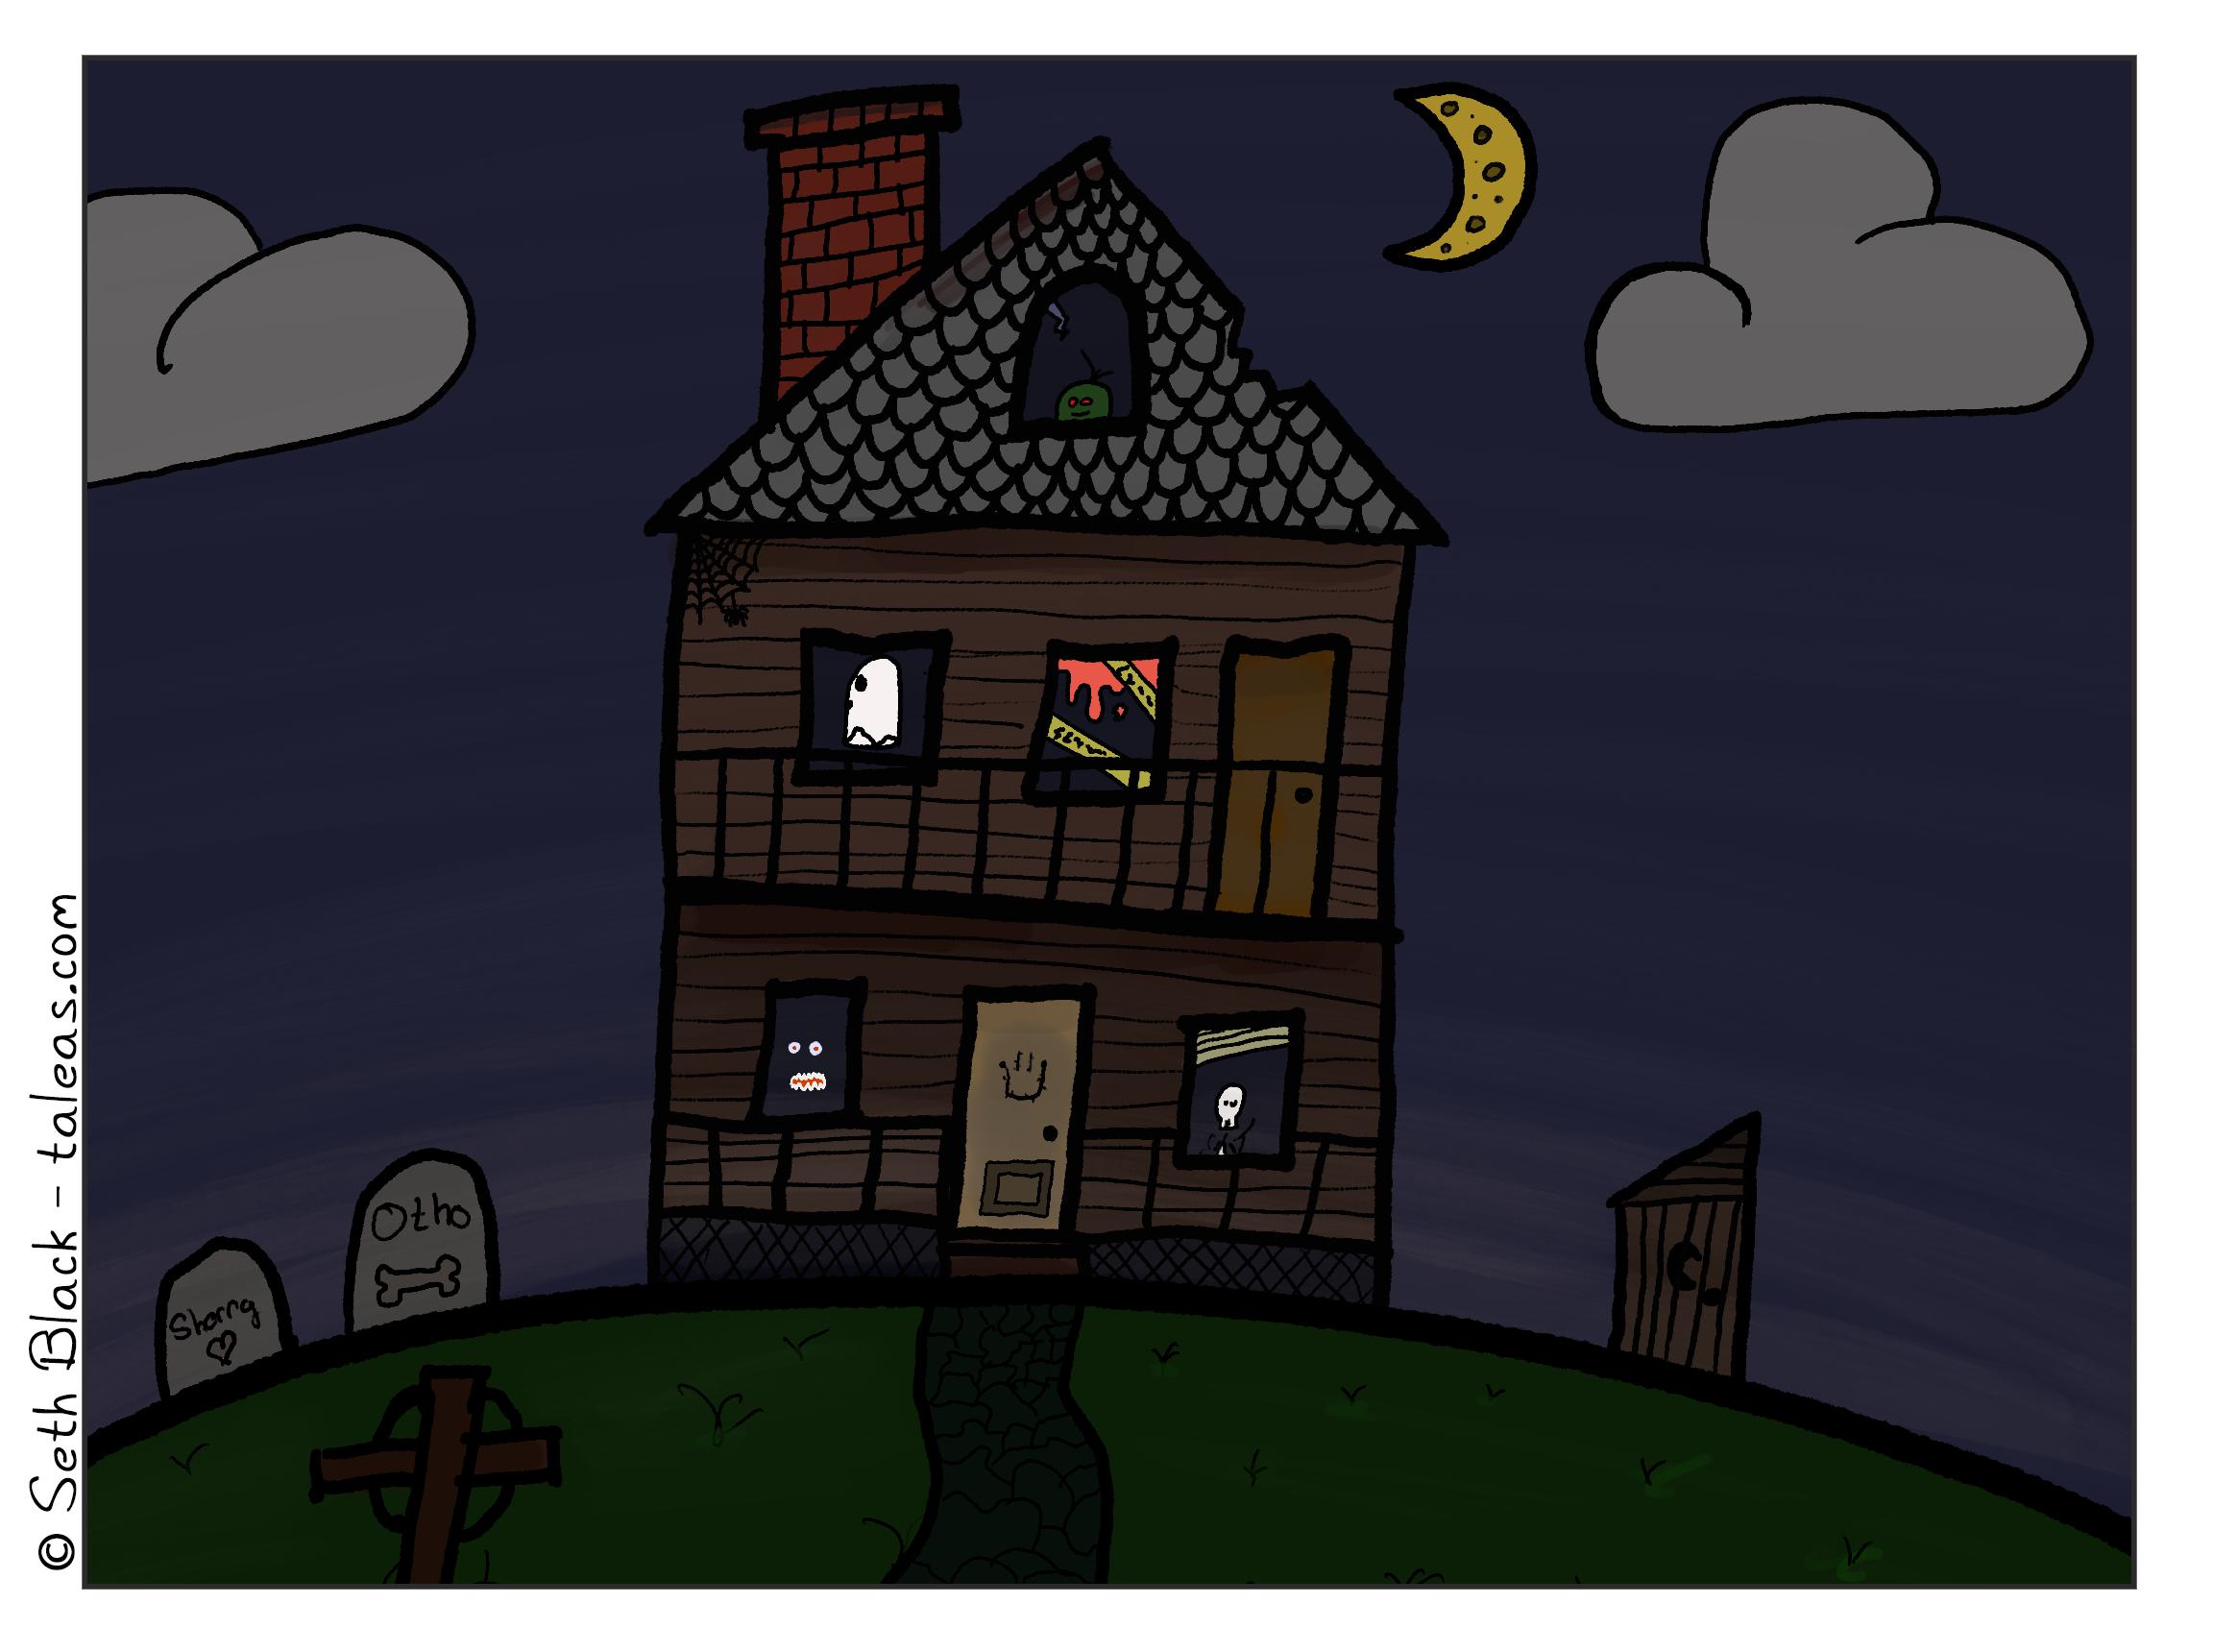 Night. A dilapidated three-story house sits on a hill. A crescent moon and haze hang over the house. Outside on the left are two tombstones with "Otho" and "Sherry". The Other tombstone has a bone, the Sherry is adorned with a heart. Otho and Sherry are the two dogs we've lost in the past two years. The right side of the house has a wooden outhouse. The yard is covered in weeds, and a cobblestone path leads up to the steps of the front porch. The first story has a front door with the Horror Smiley face. A skeleton peers from one window, two eyes and teeth from another. The second floor has a ghost floating by and a bloody crime scene. The attic has a green goblin looking right at you.